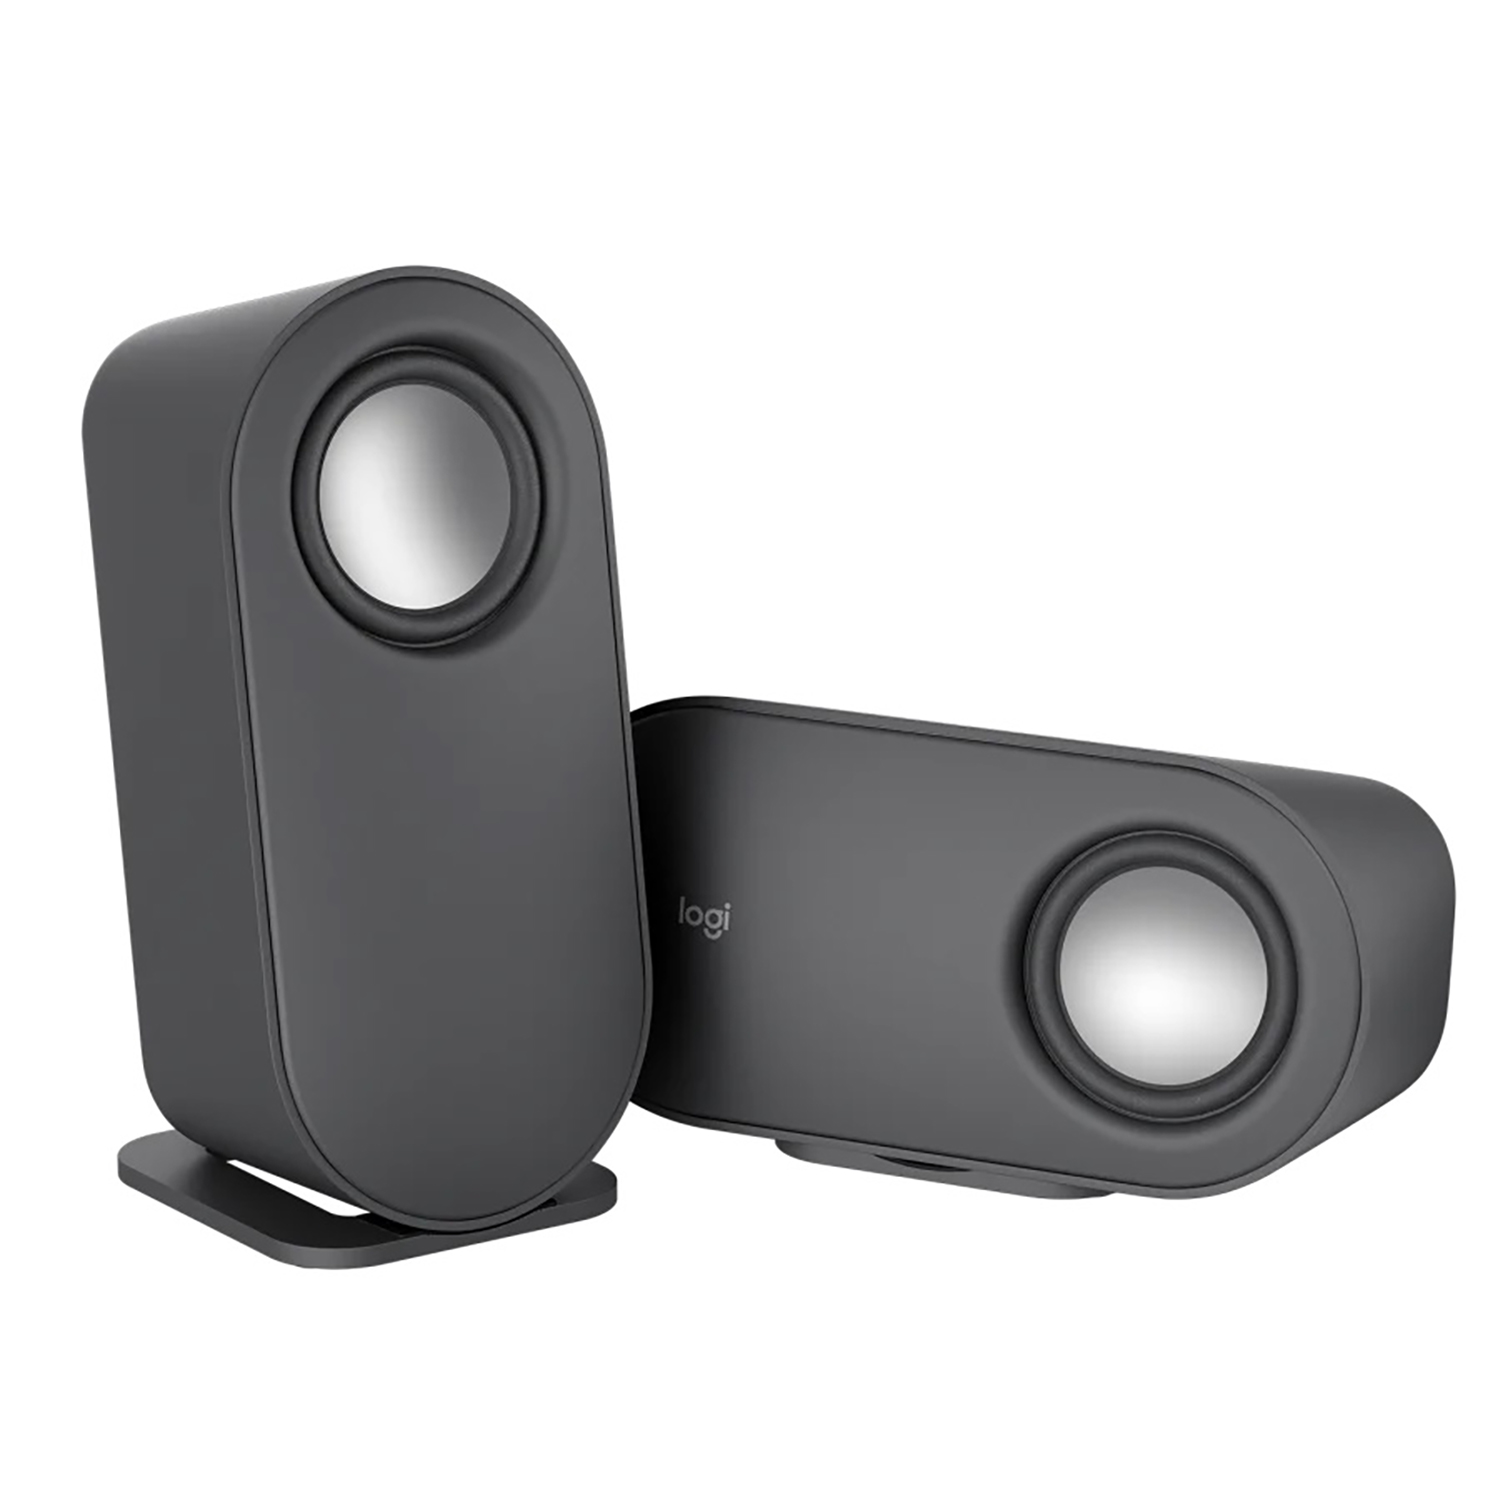 Logitech Z407 Bluetooth Computer Speakers with Subwoofer